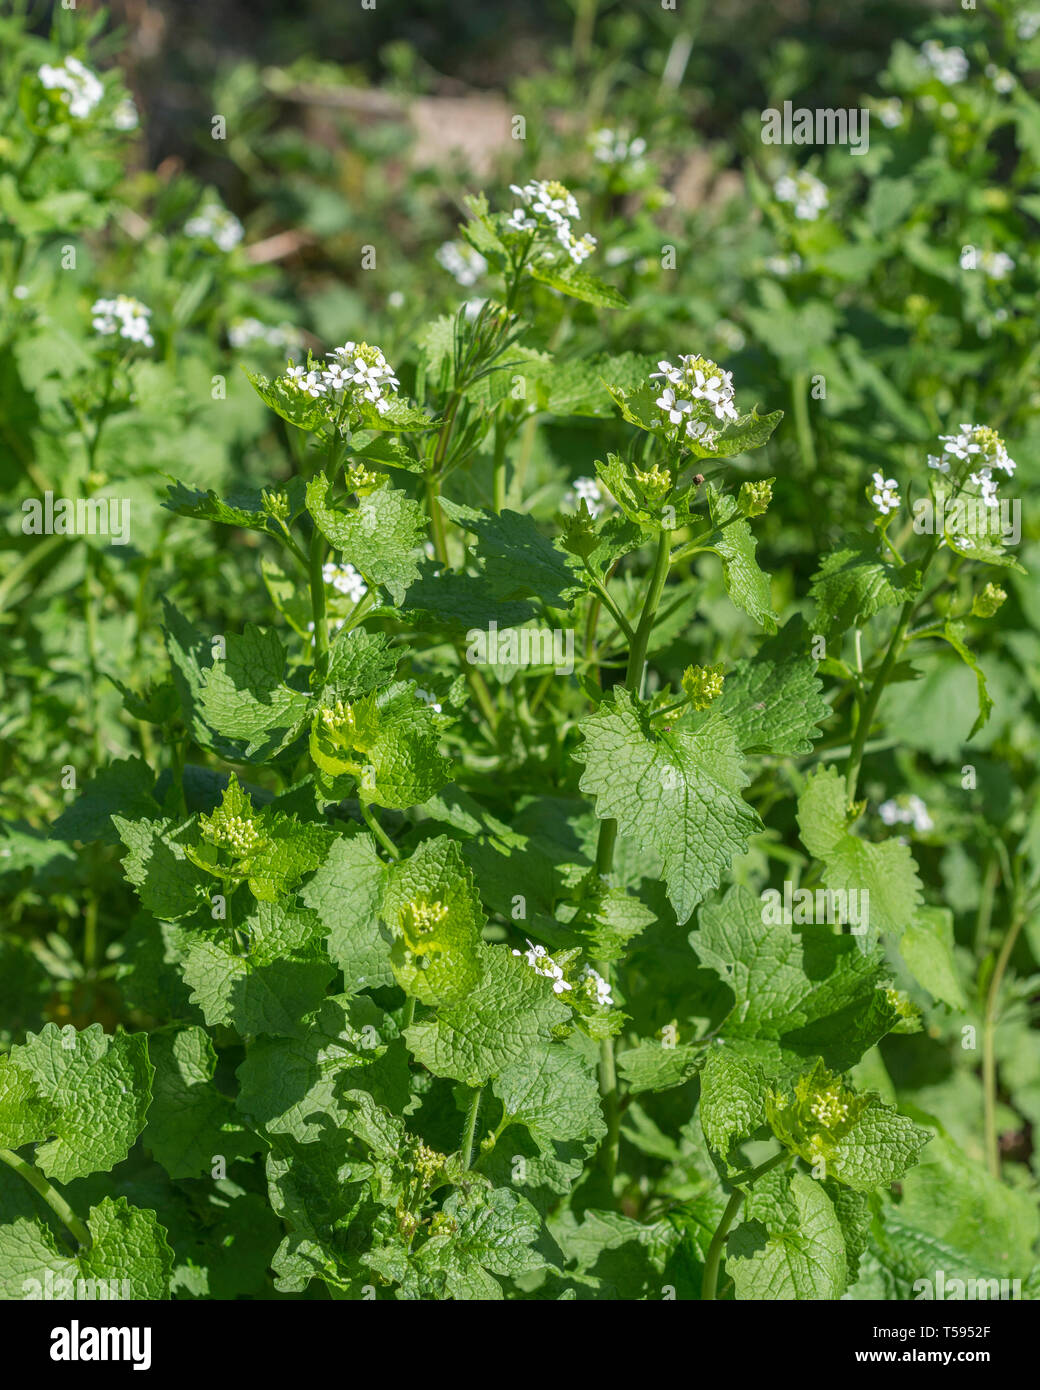 White flowers hedgerow weed Hedge Garlic / Alliaria petiolata, the leaves of which have garlic flavour, may be eaten, and once used in herbal medicine Stock Photo